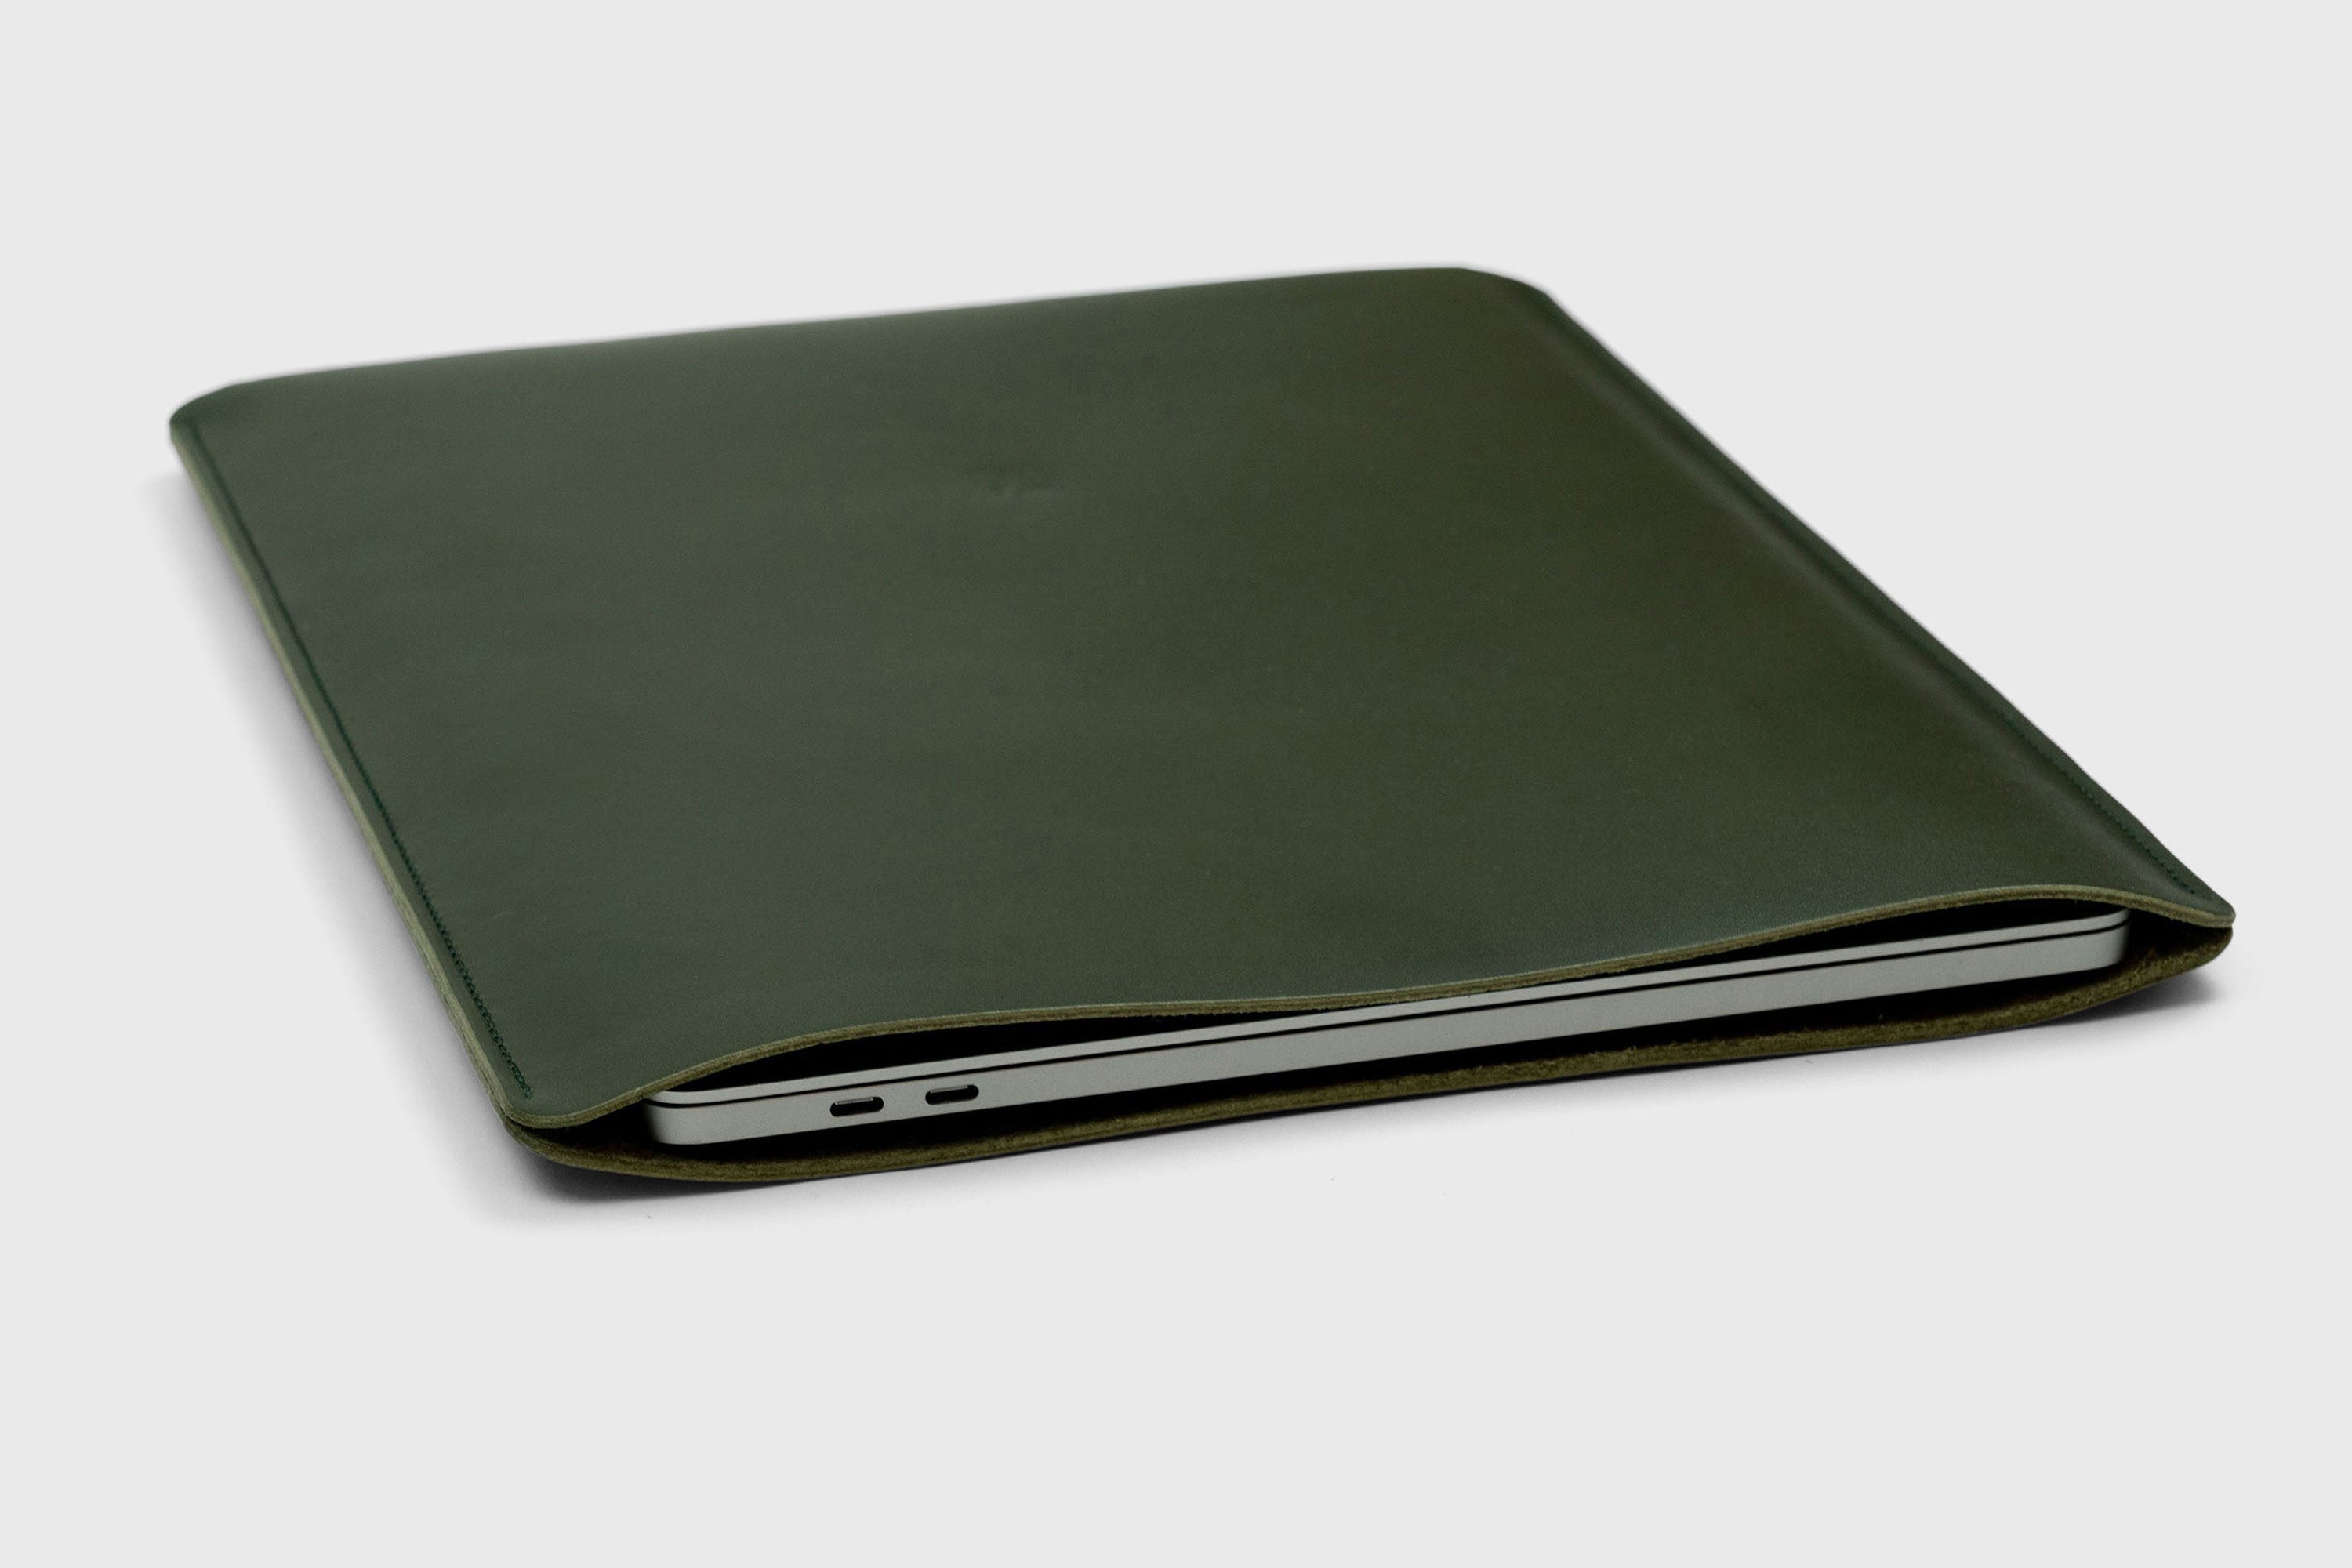 MacBook Air 15 Inch Sleeve Leather Dark Olive Green Colour Minimalistic Design Premium Quality By Atelier Madre Manuel Dreesmann Atelier Madre Barcelona Spain